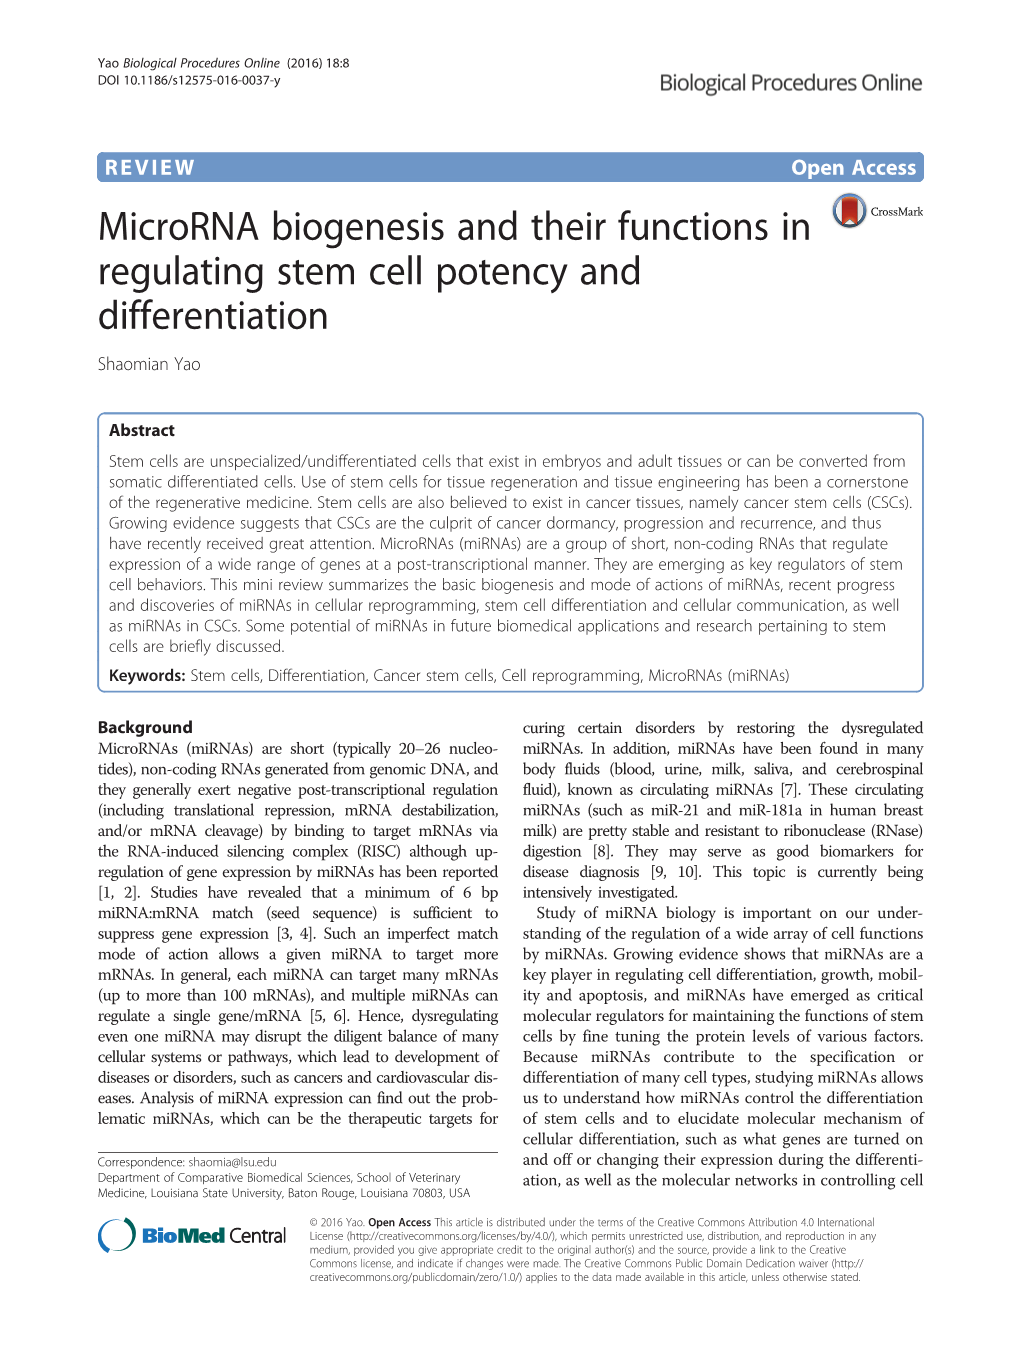 Microrna Biogenesis and Their Functions in Regulating Stem Cell Potency and Differentiation Shaomian Yao